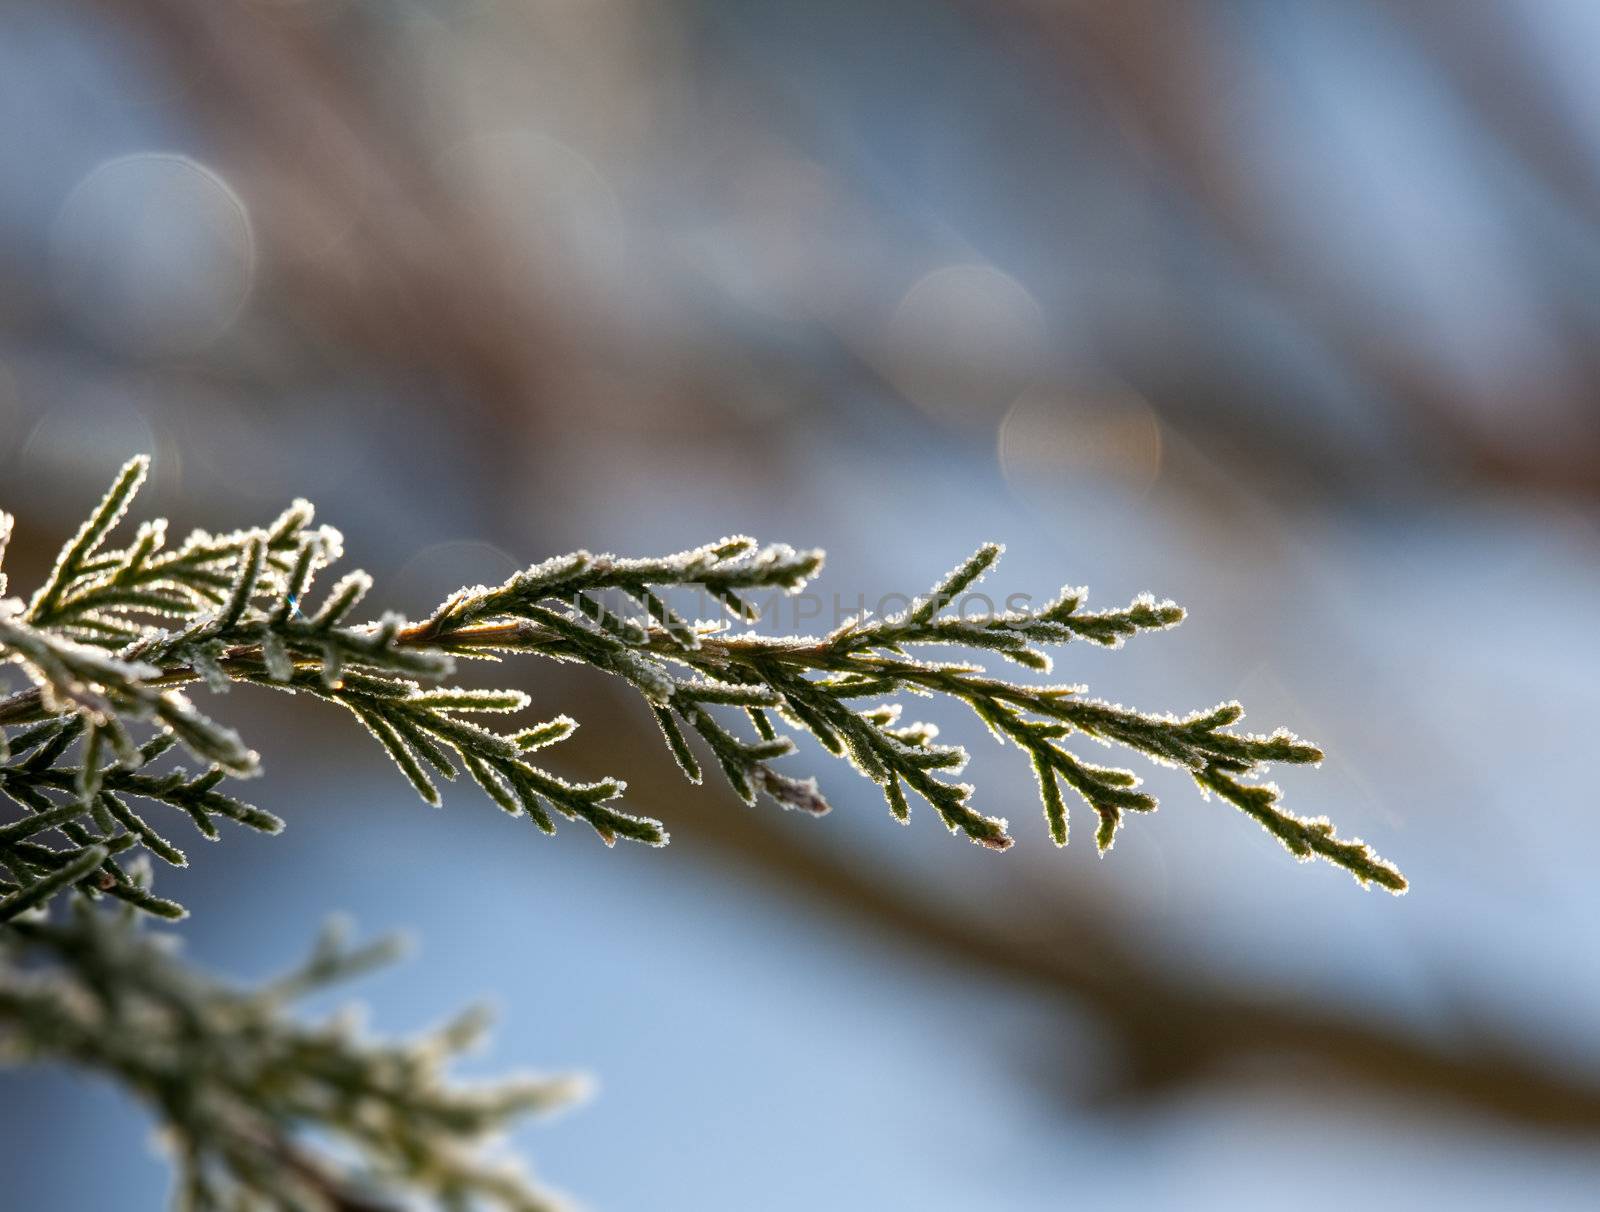 Sunlit frosted pine needles by steheap